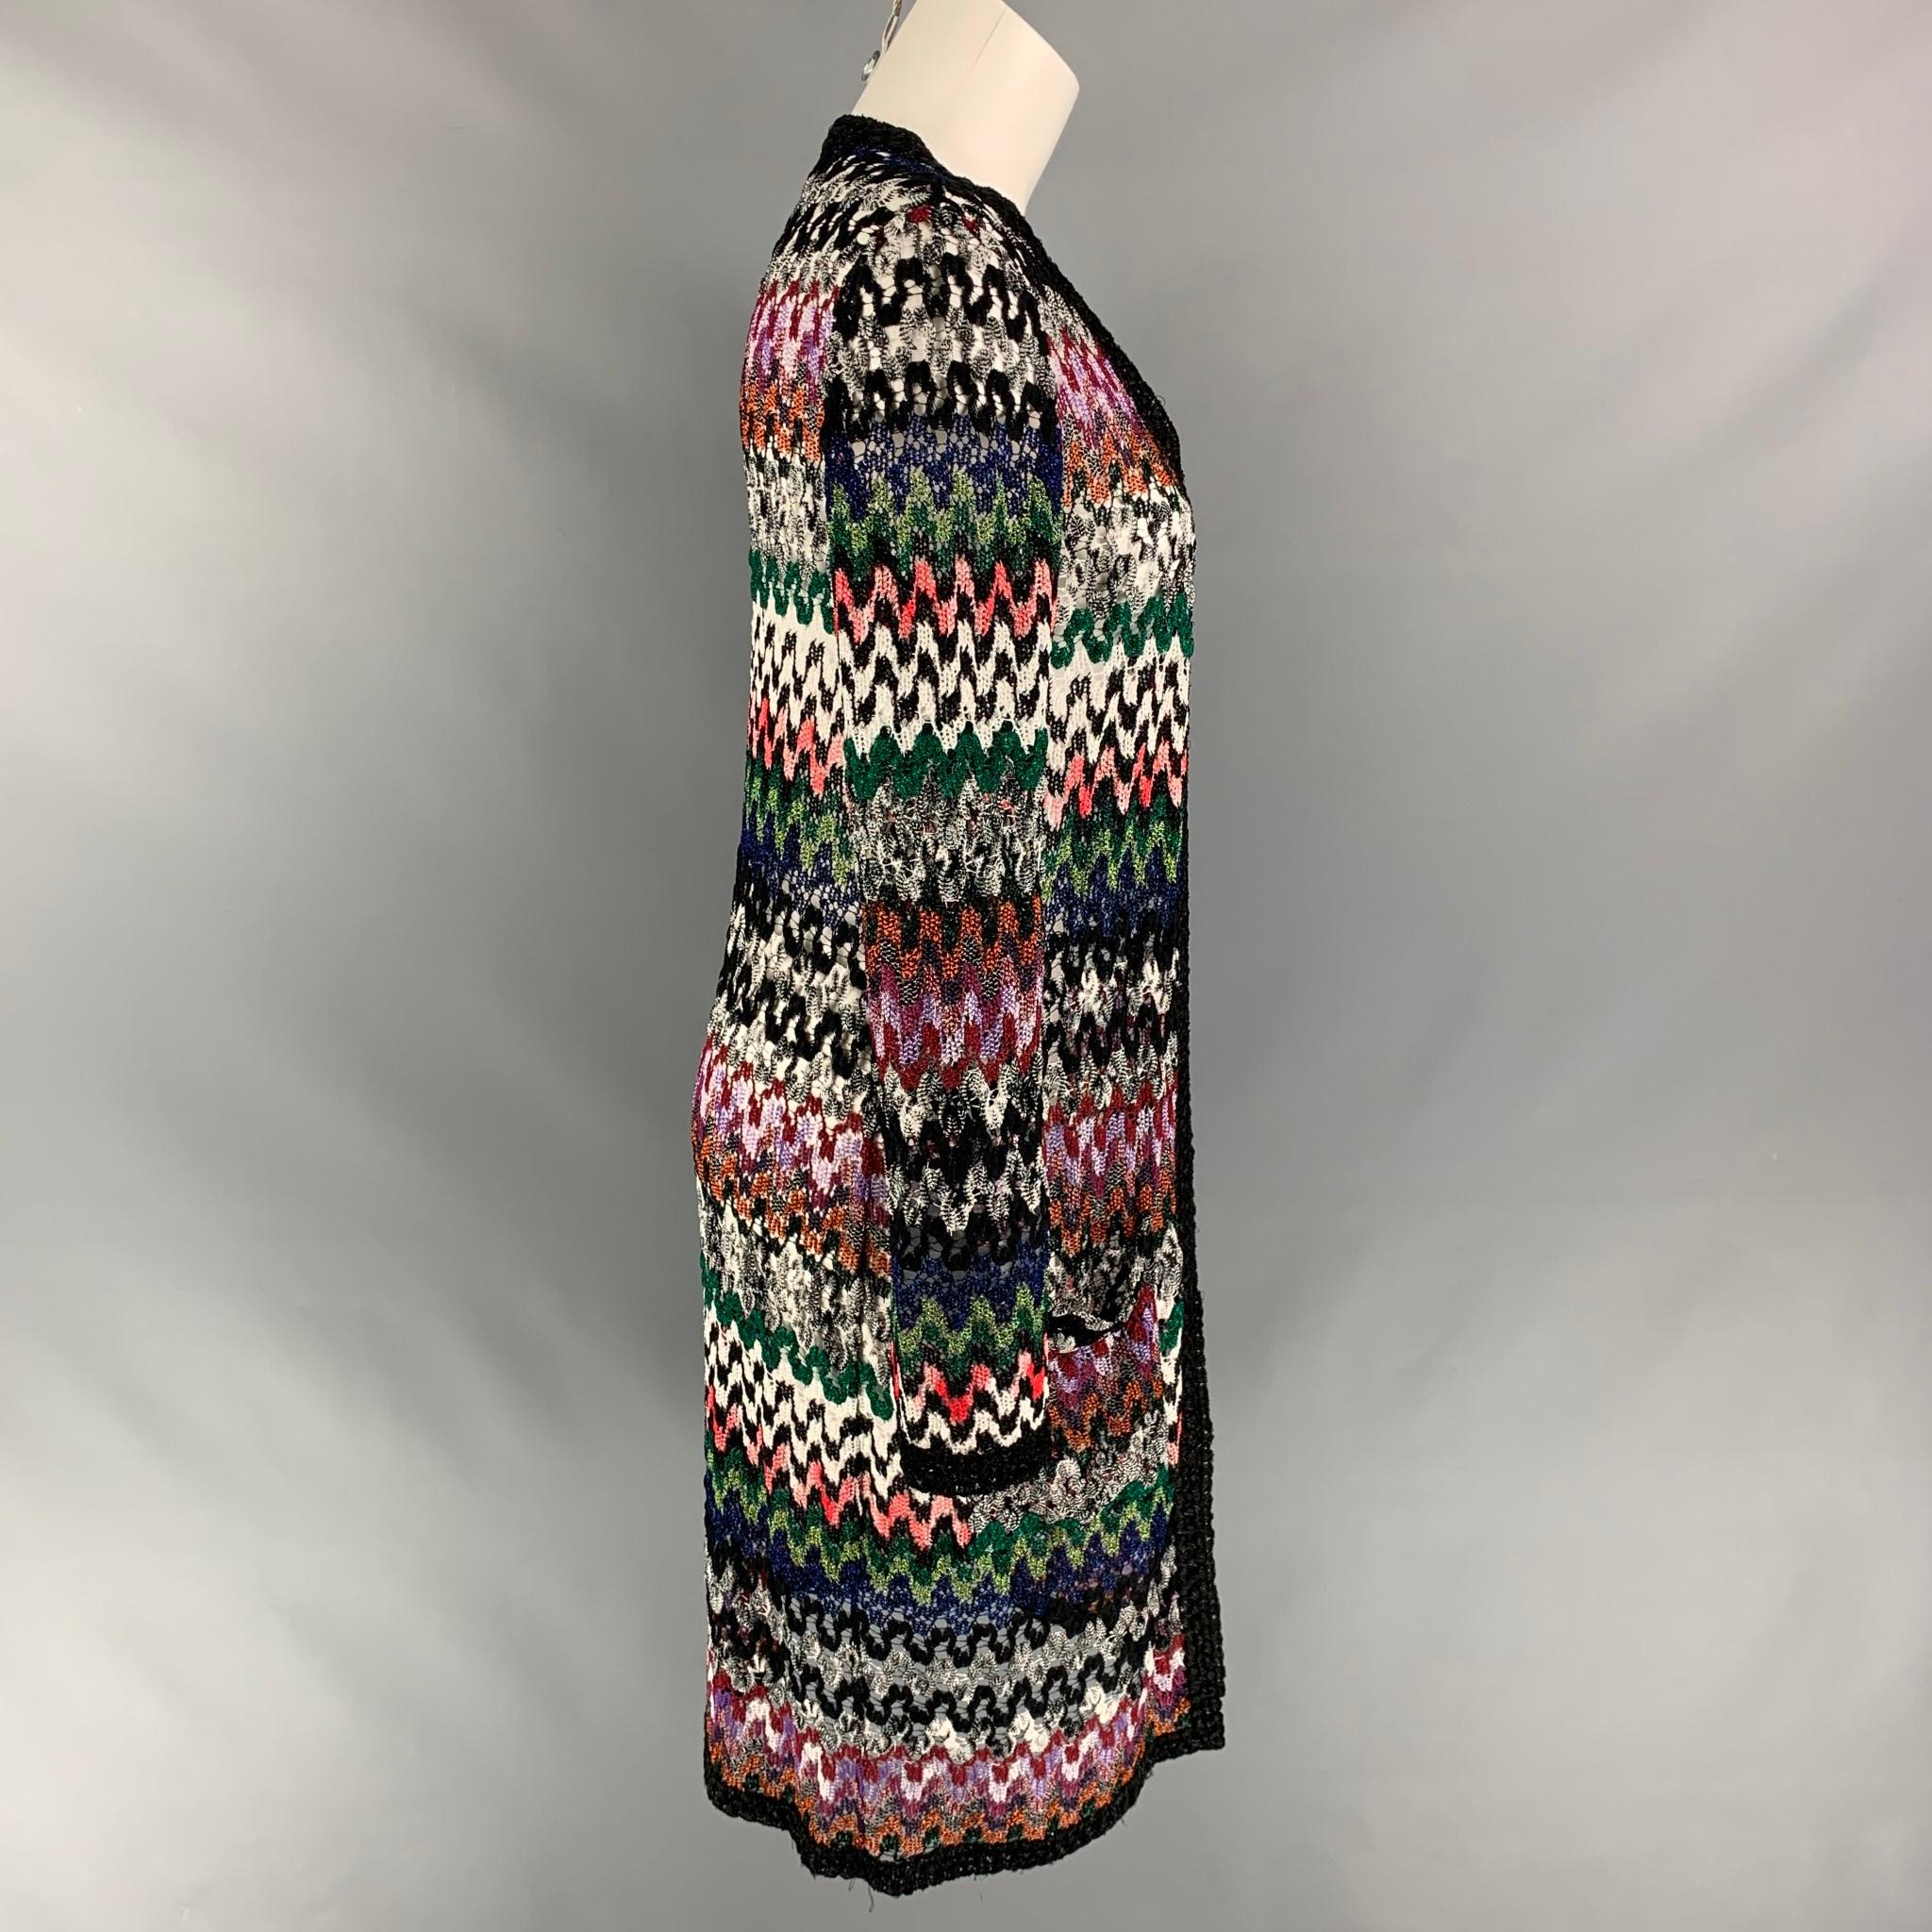 MISSONI cardigan comes in a multi-color knitted viscose blend featuring long sleeves and a open front. Made in Italy.

Very Good Pre-Owned Condition.
Marked: 38
Original Retail Price: $1,680.00

Measurements:

Shoulder: 13 in.
Bust: 36 in.
Sleeve: